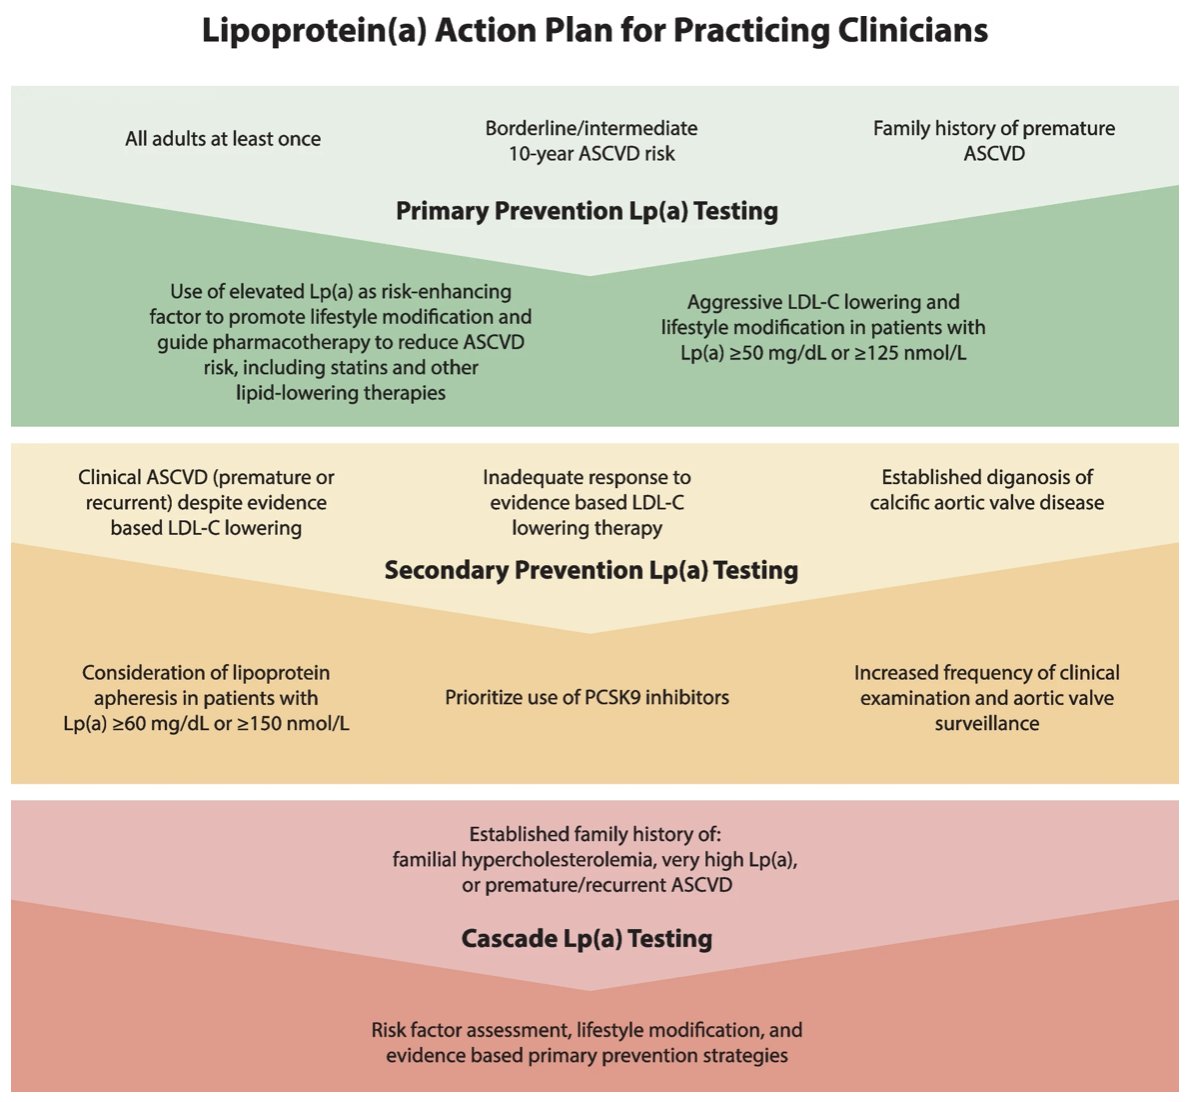 ➡️Test for Lp(a)? Yes. ➡️Is Lp(a) actionable today? Yes. Guidelines steadily moving toward universal screening (Table 1). See our 'Lp(a) Action Plan' for clinicians. Great work by @garymamd @TommyTChiou @ErinMichos @PamTaubMD @Lpa_Doc @hsbhatia doi.org/10.1007/s11886…